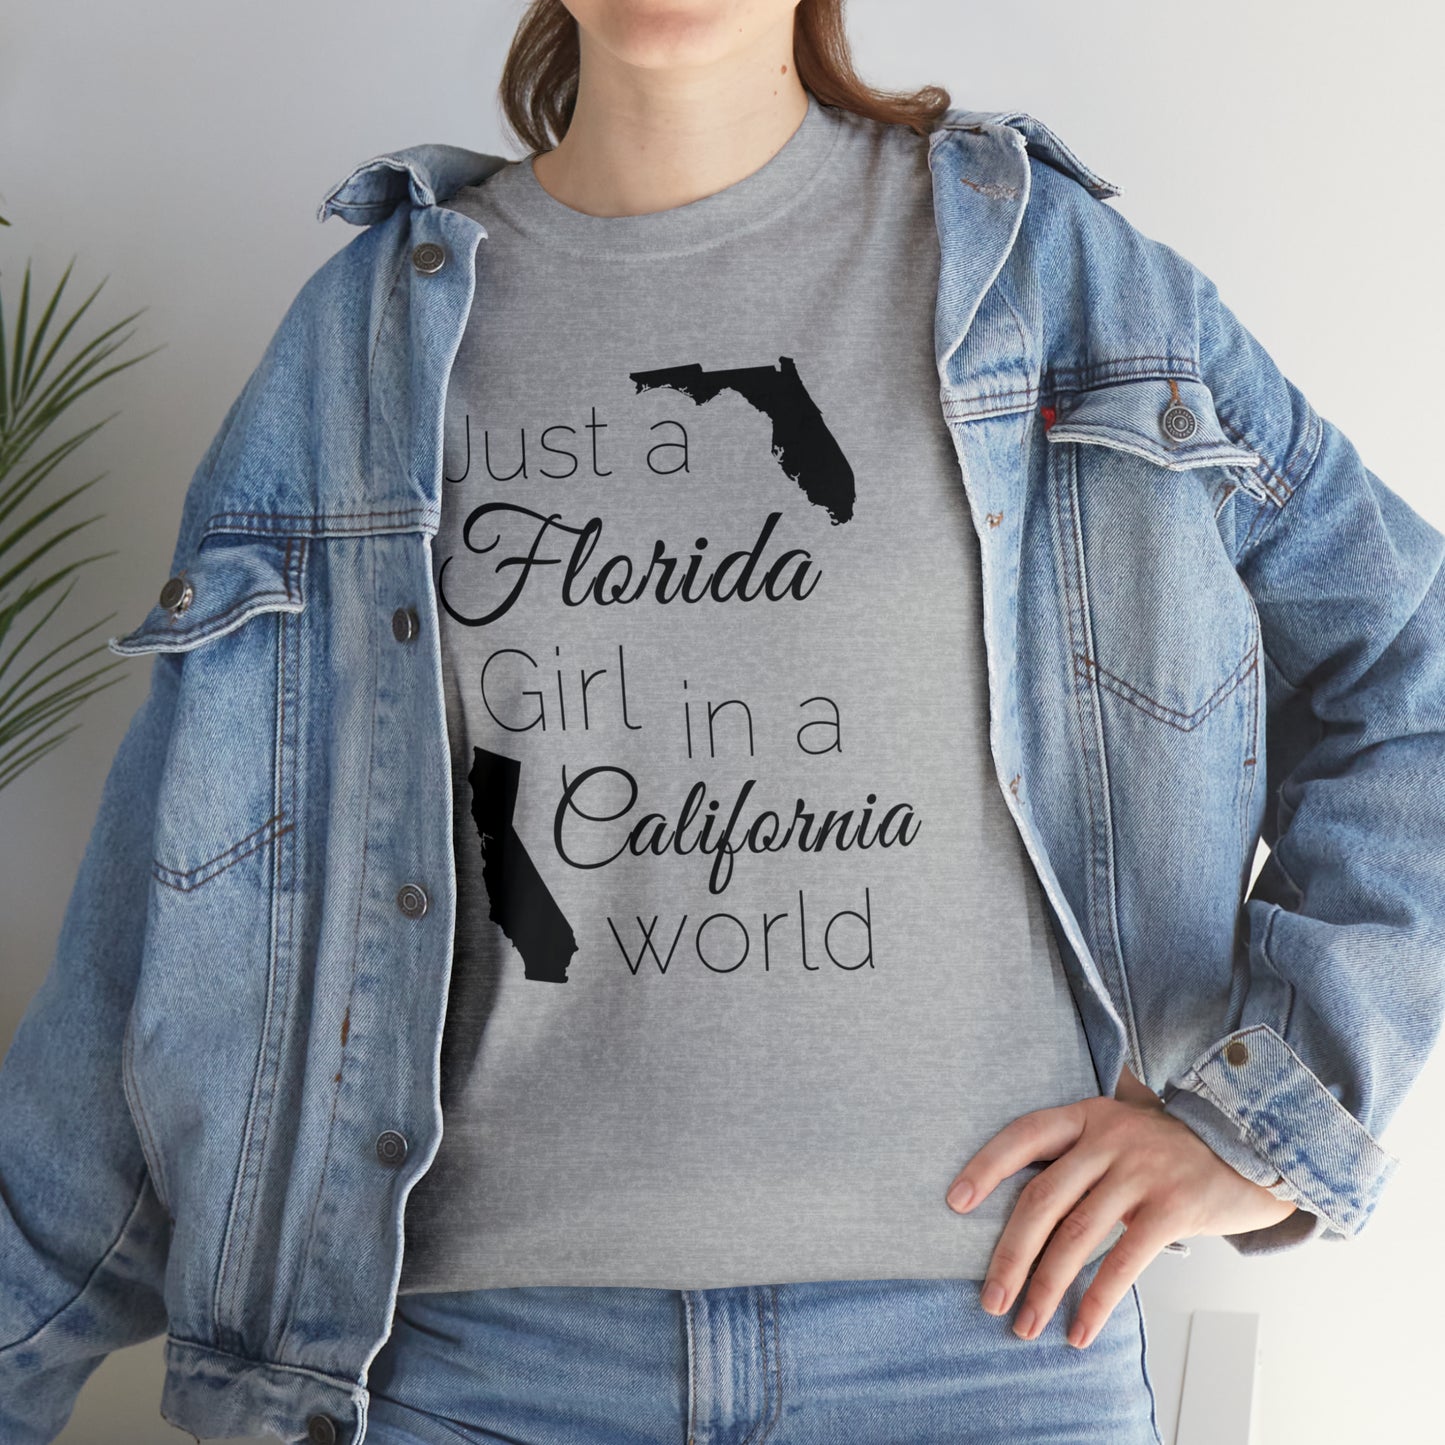 Just a Florida Girl in a California World Unisex Heavy Cotton Tee